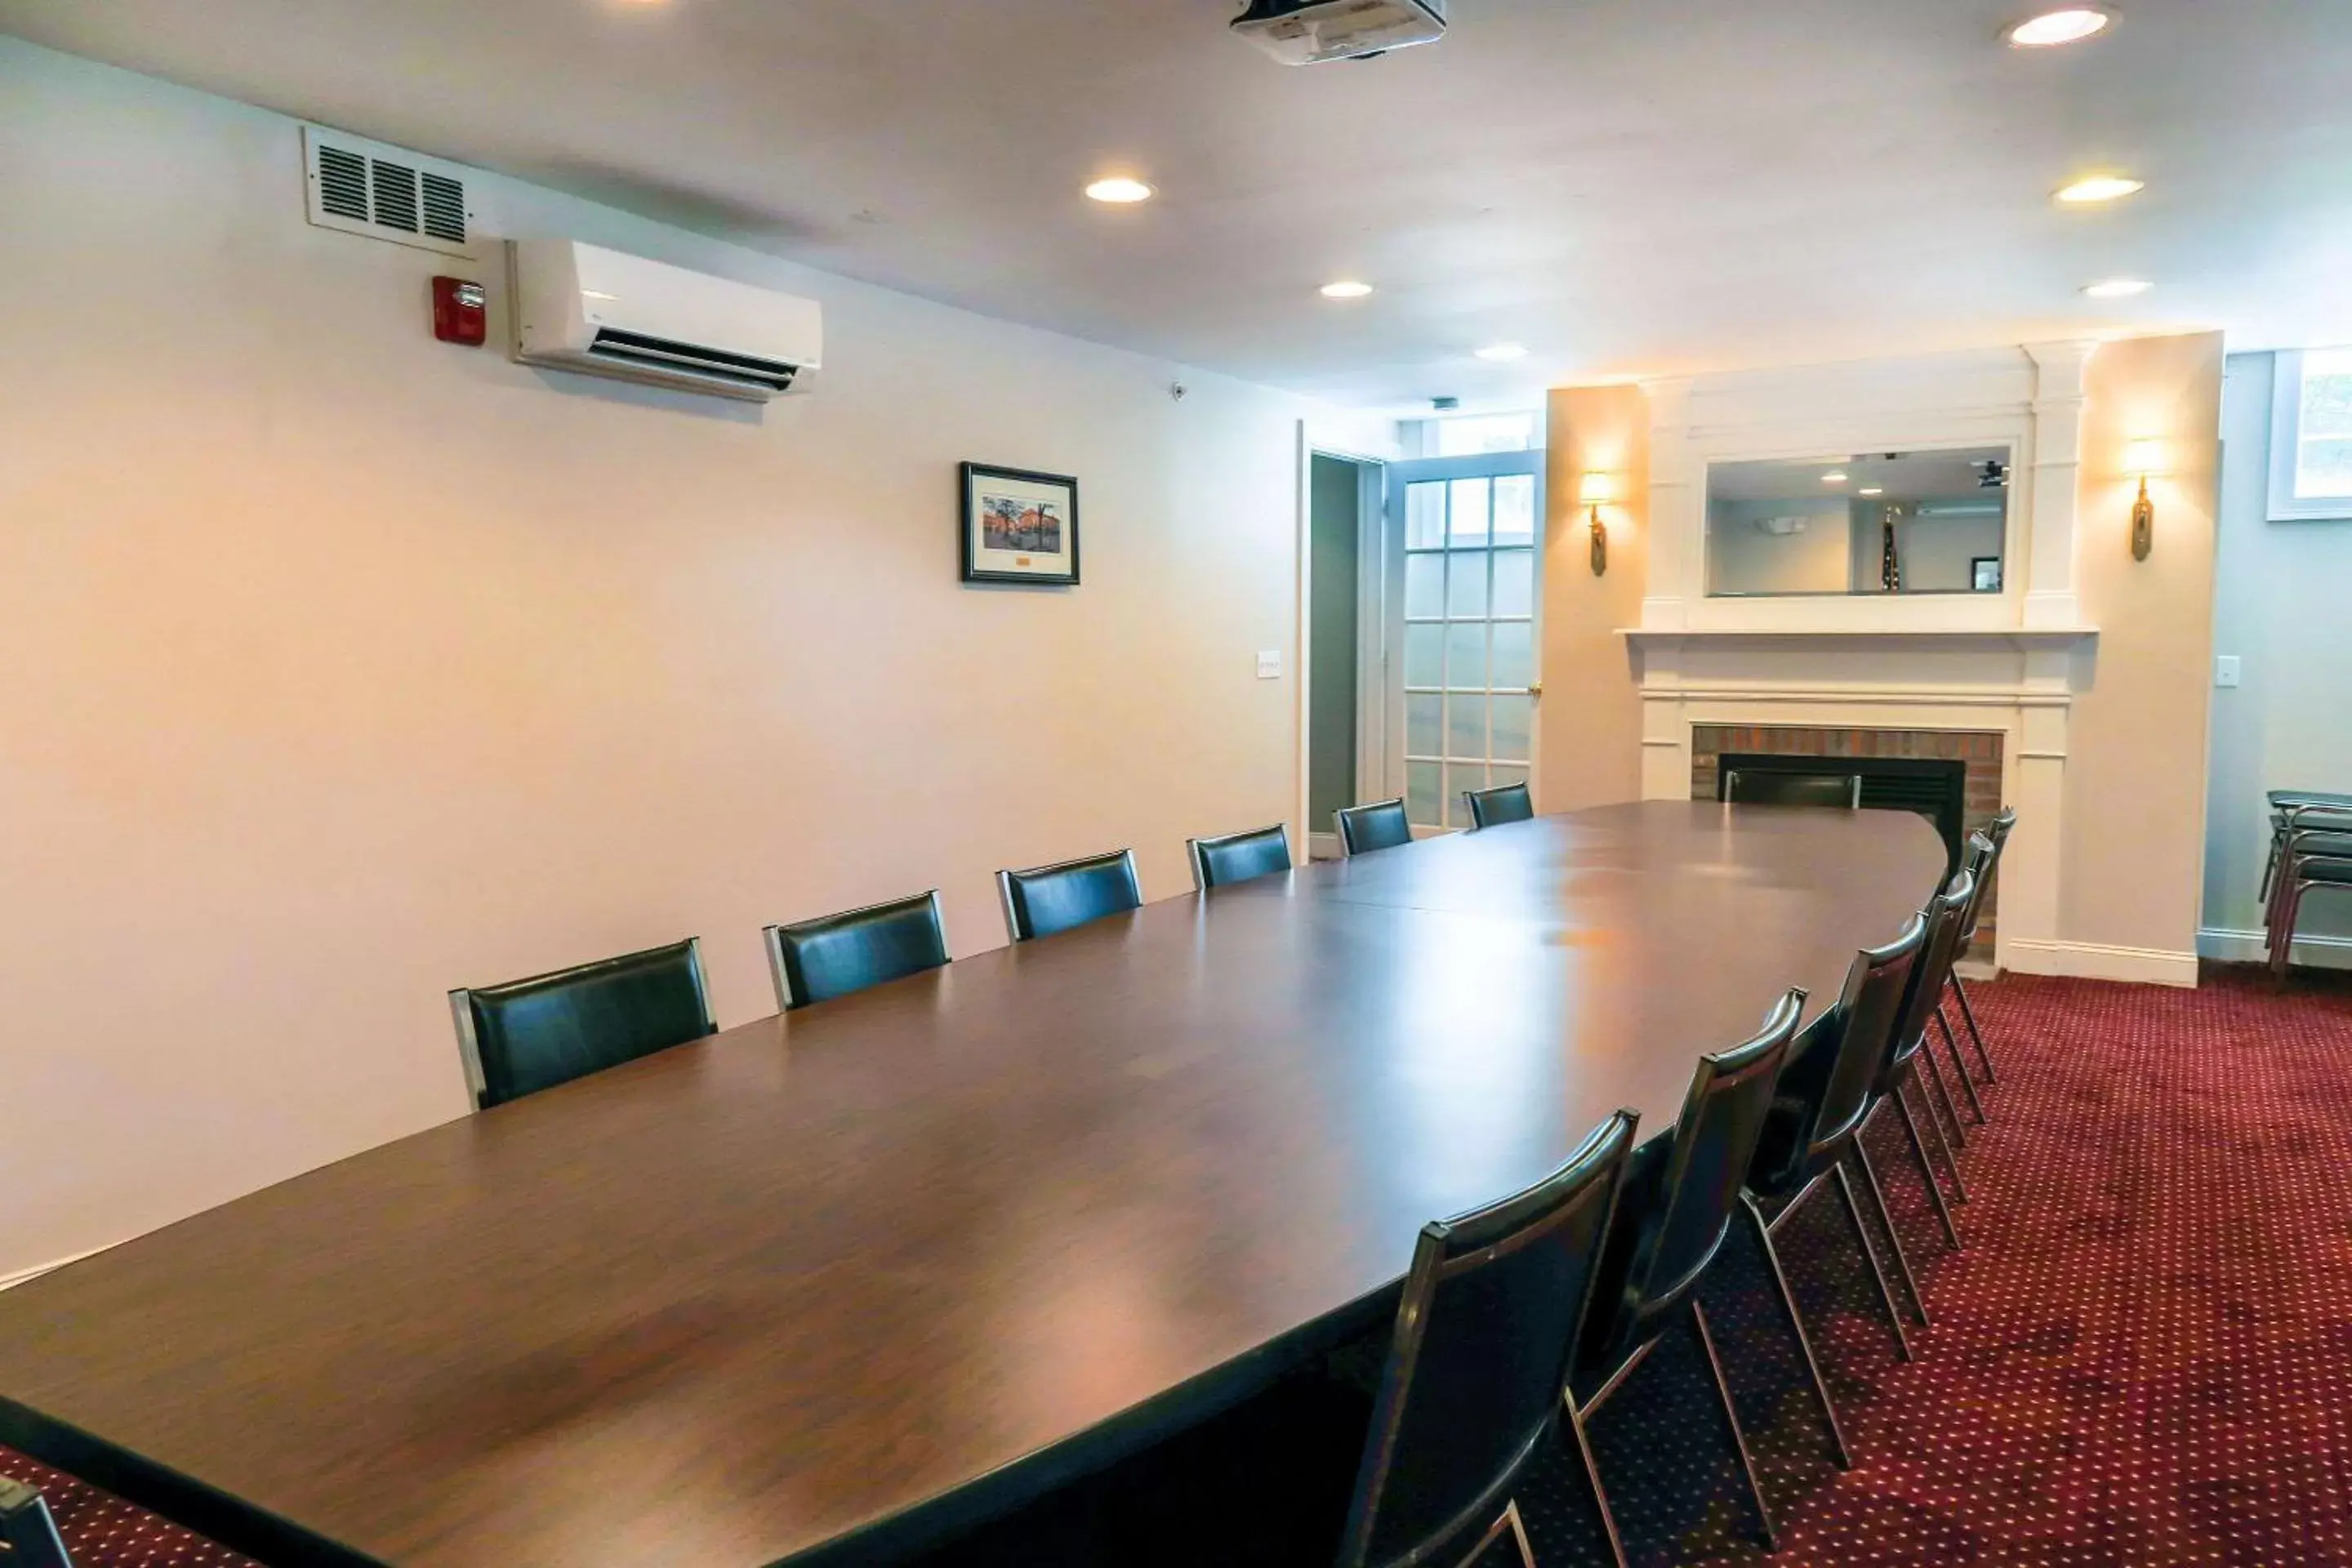 Meeting/conference room in Essex Street Inn & Suites, Ascend Hotel Collection